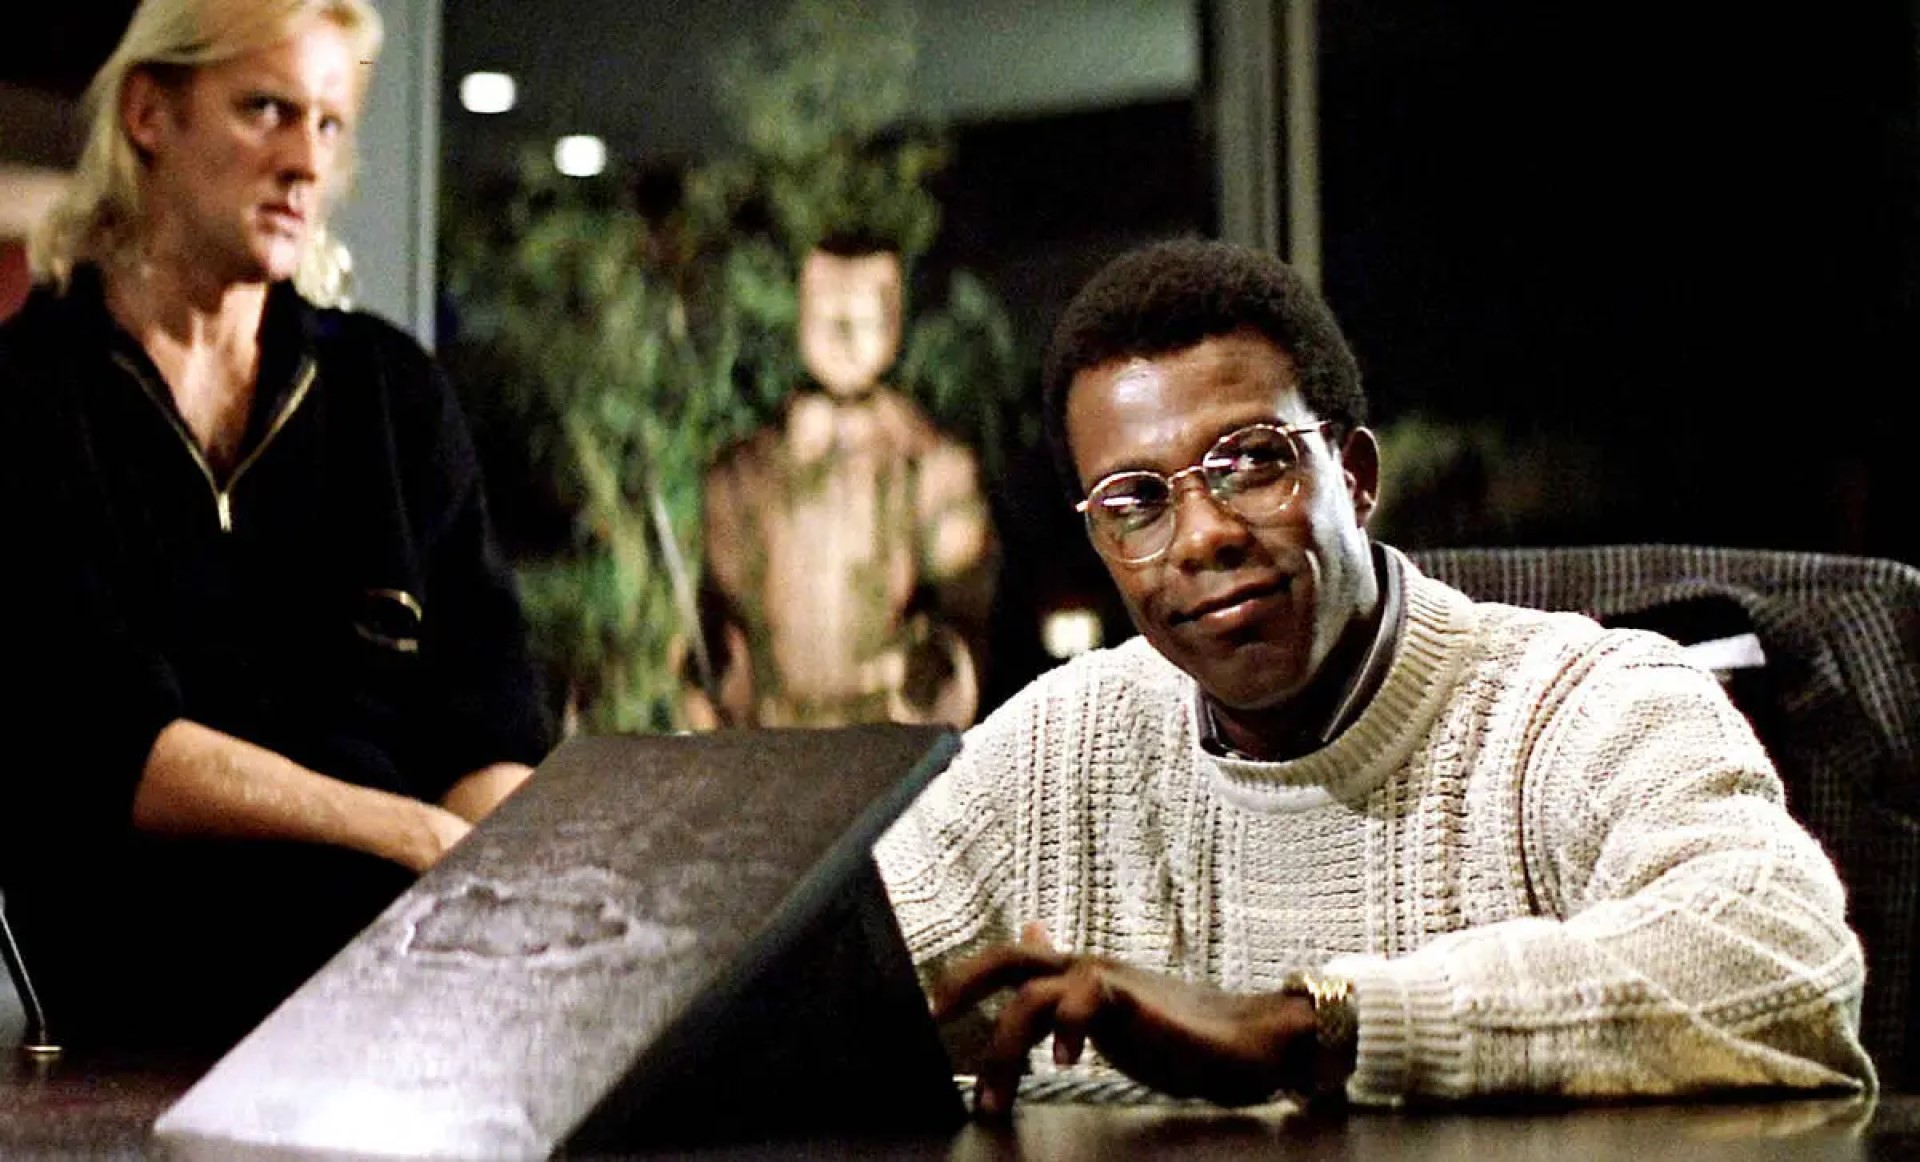 <p>Before his big break in Hollywood, Gilyard played a supportive role in 20 episodes of the series 'CHIPs.' We could see him in the NBC drama about two highway patrol officers from 1982 to 1983.</p> <p>Image: 'Die Hard,' 1988</p>